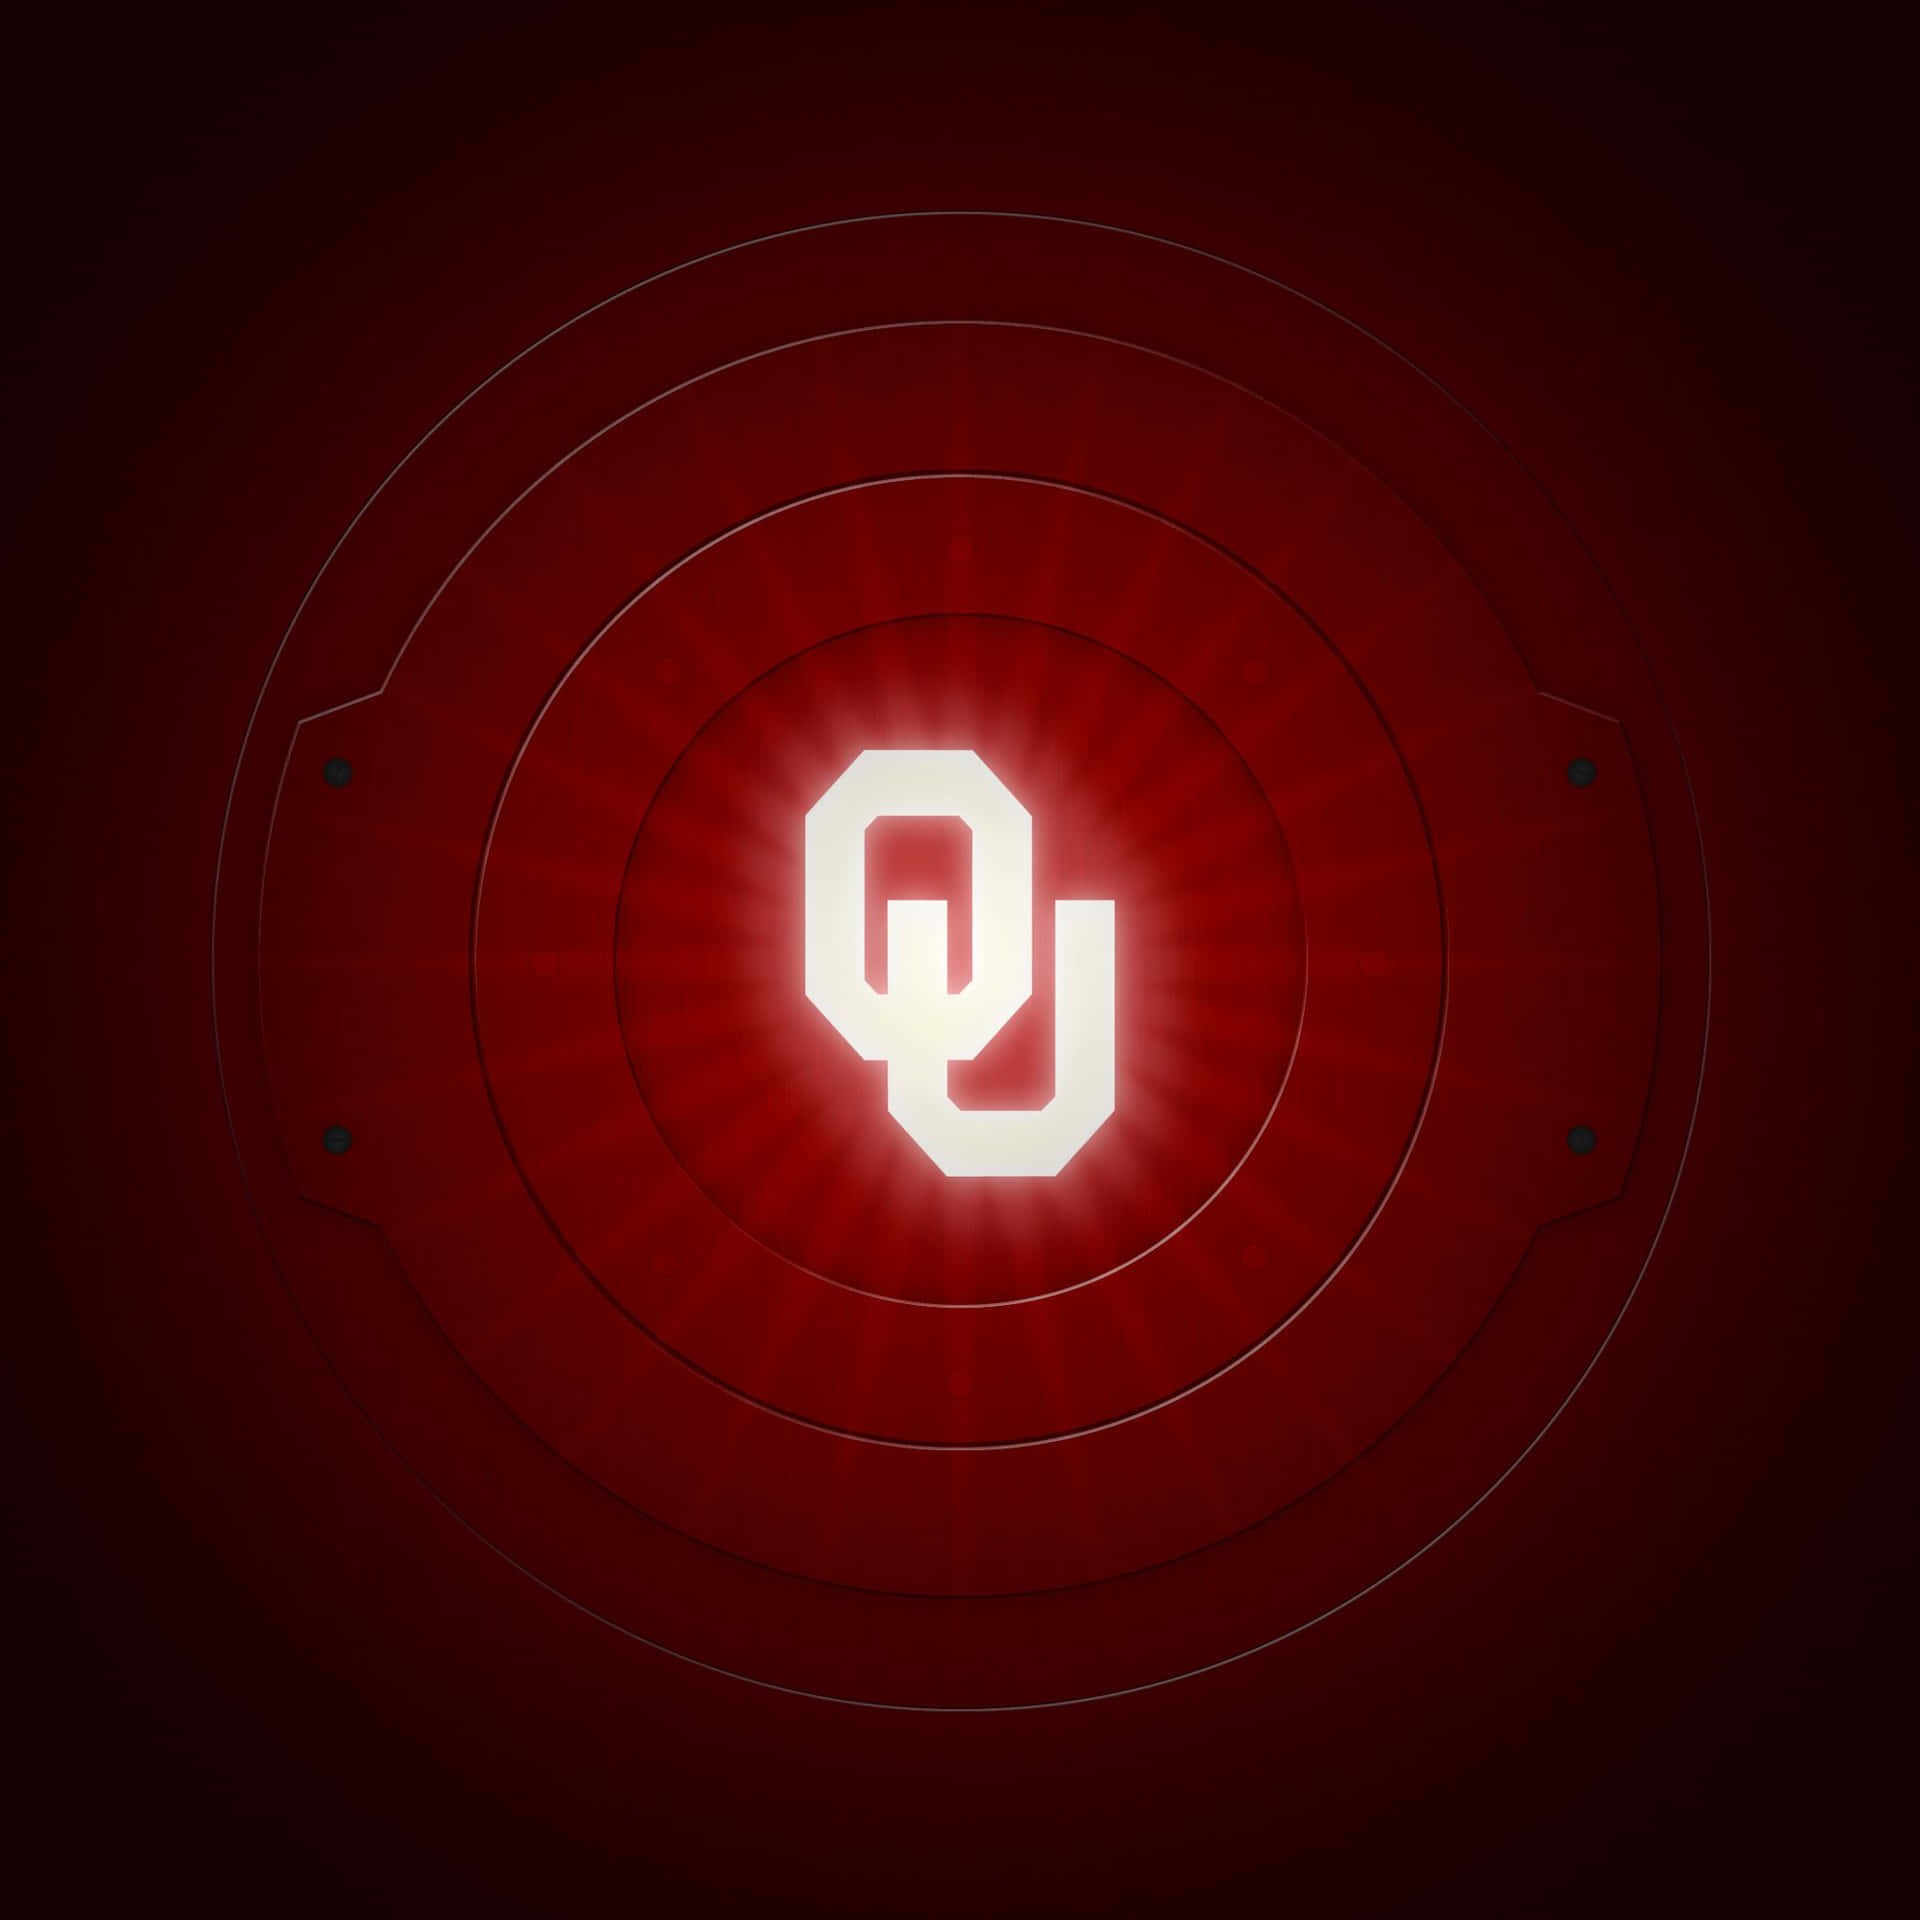 "The Pride of Oklahoma - Join us as we Soar!" Wallpaper